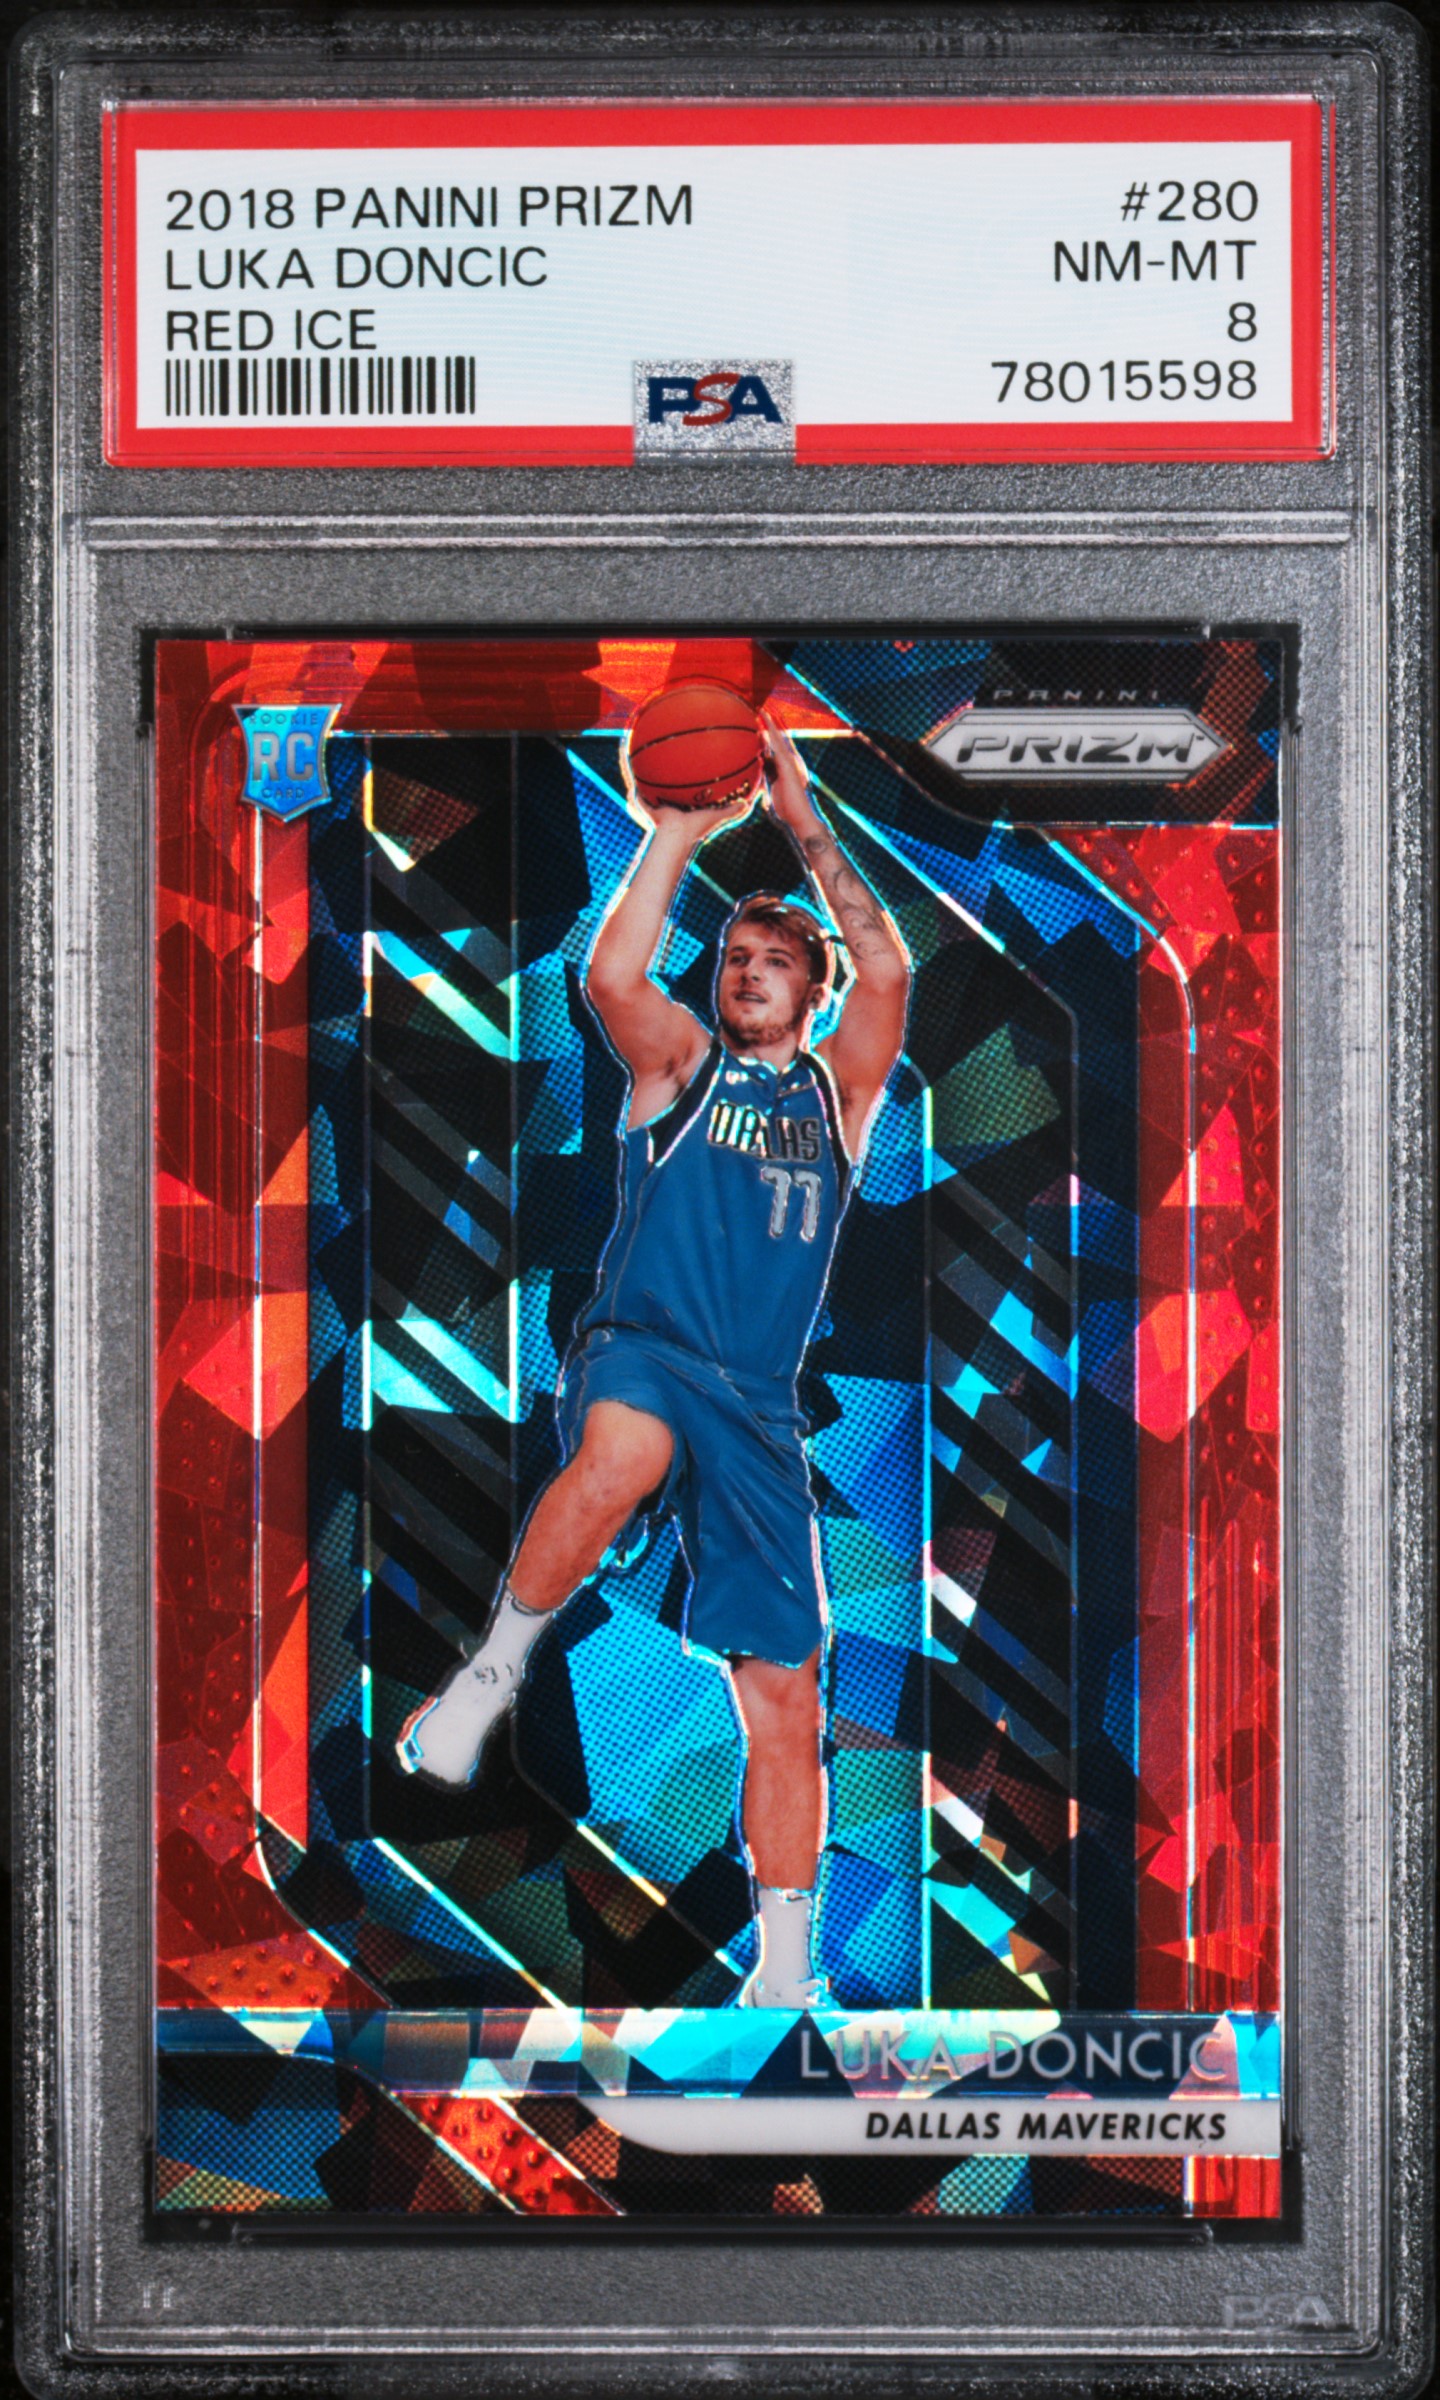 2018 Panini Prizm Red Ice #280 Luka Doncic Rookie Card – PSA NM-MT 8.0